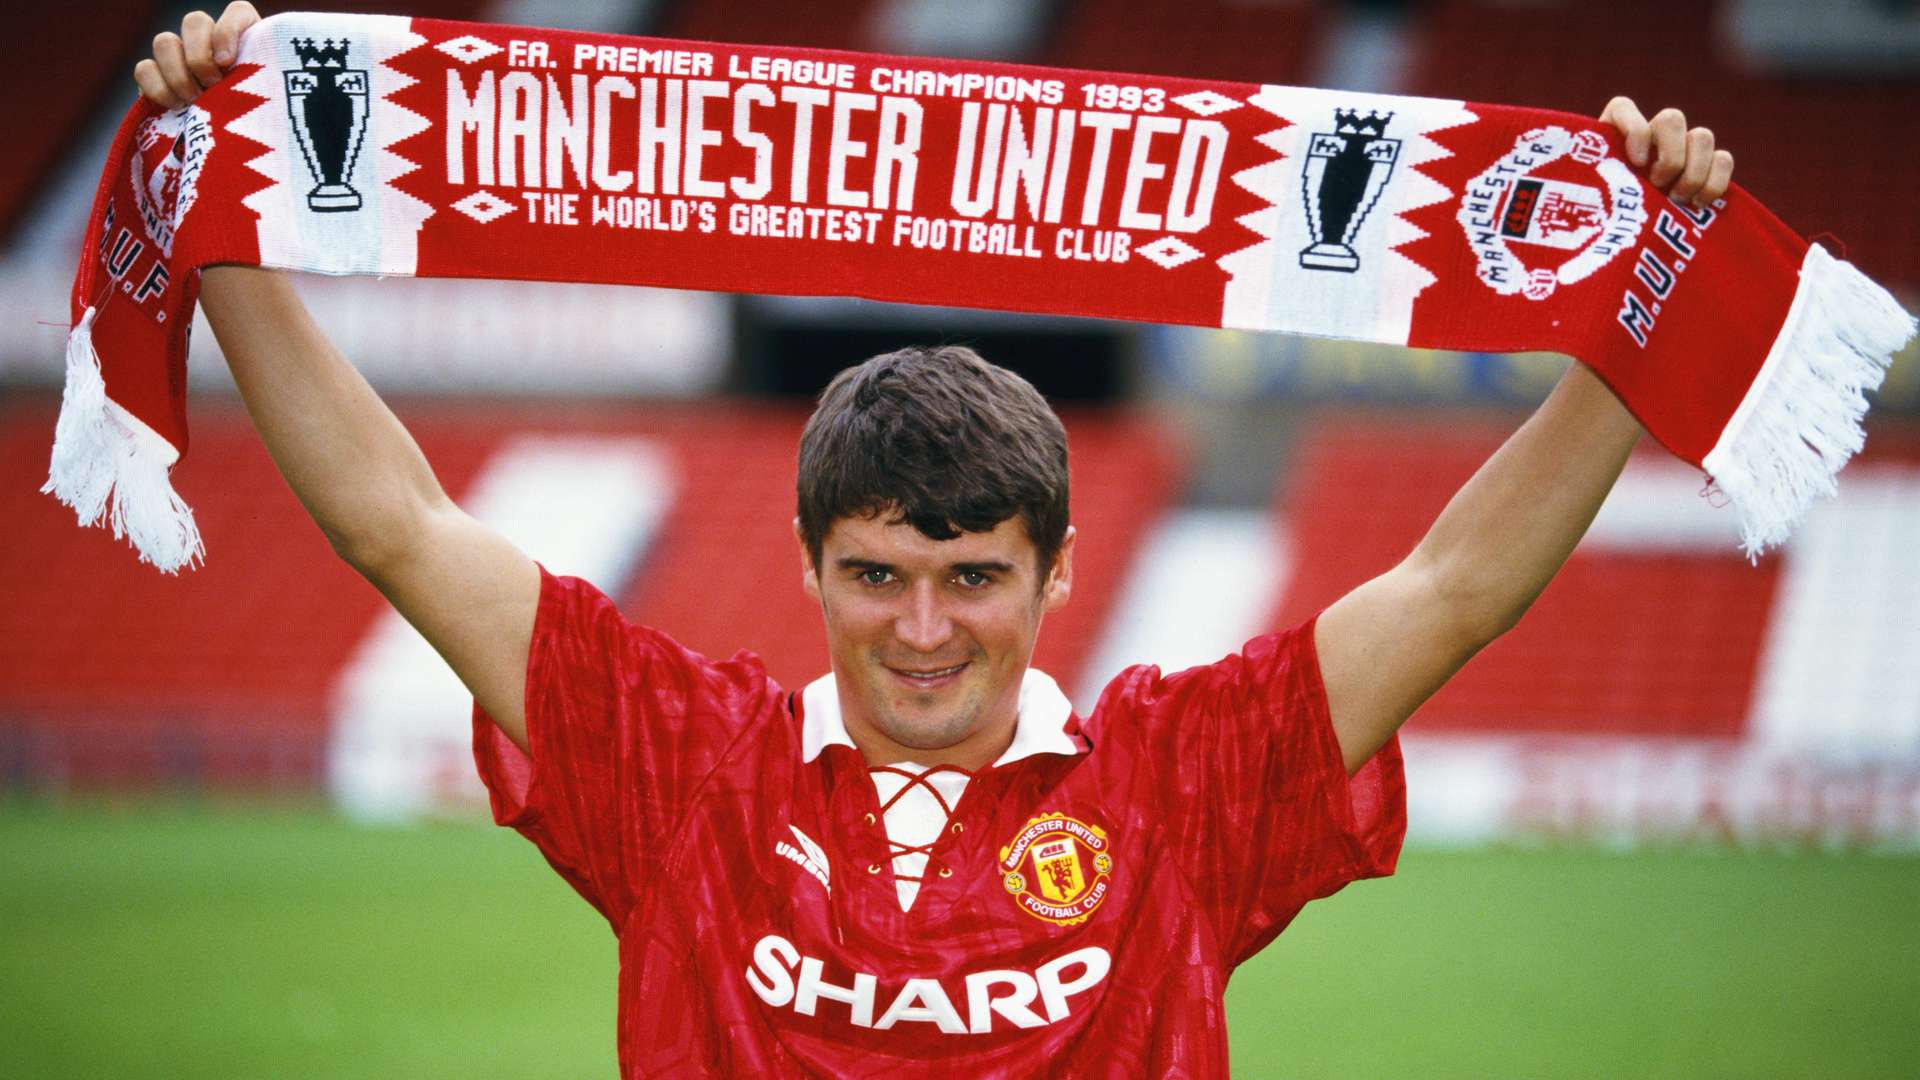 Inside United archive interview with Roy Keane from 1993